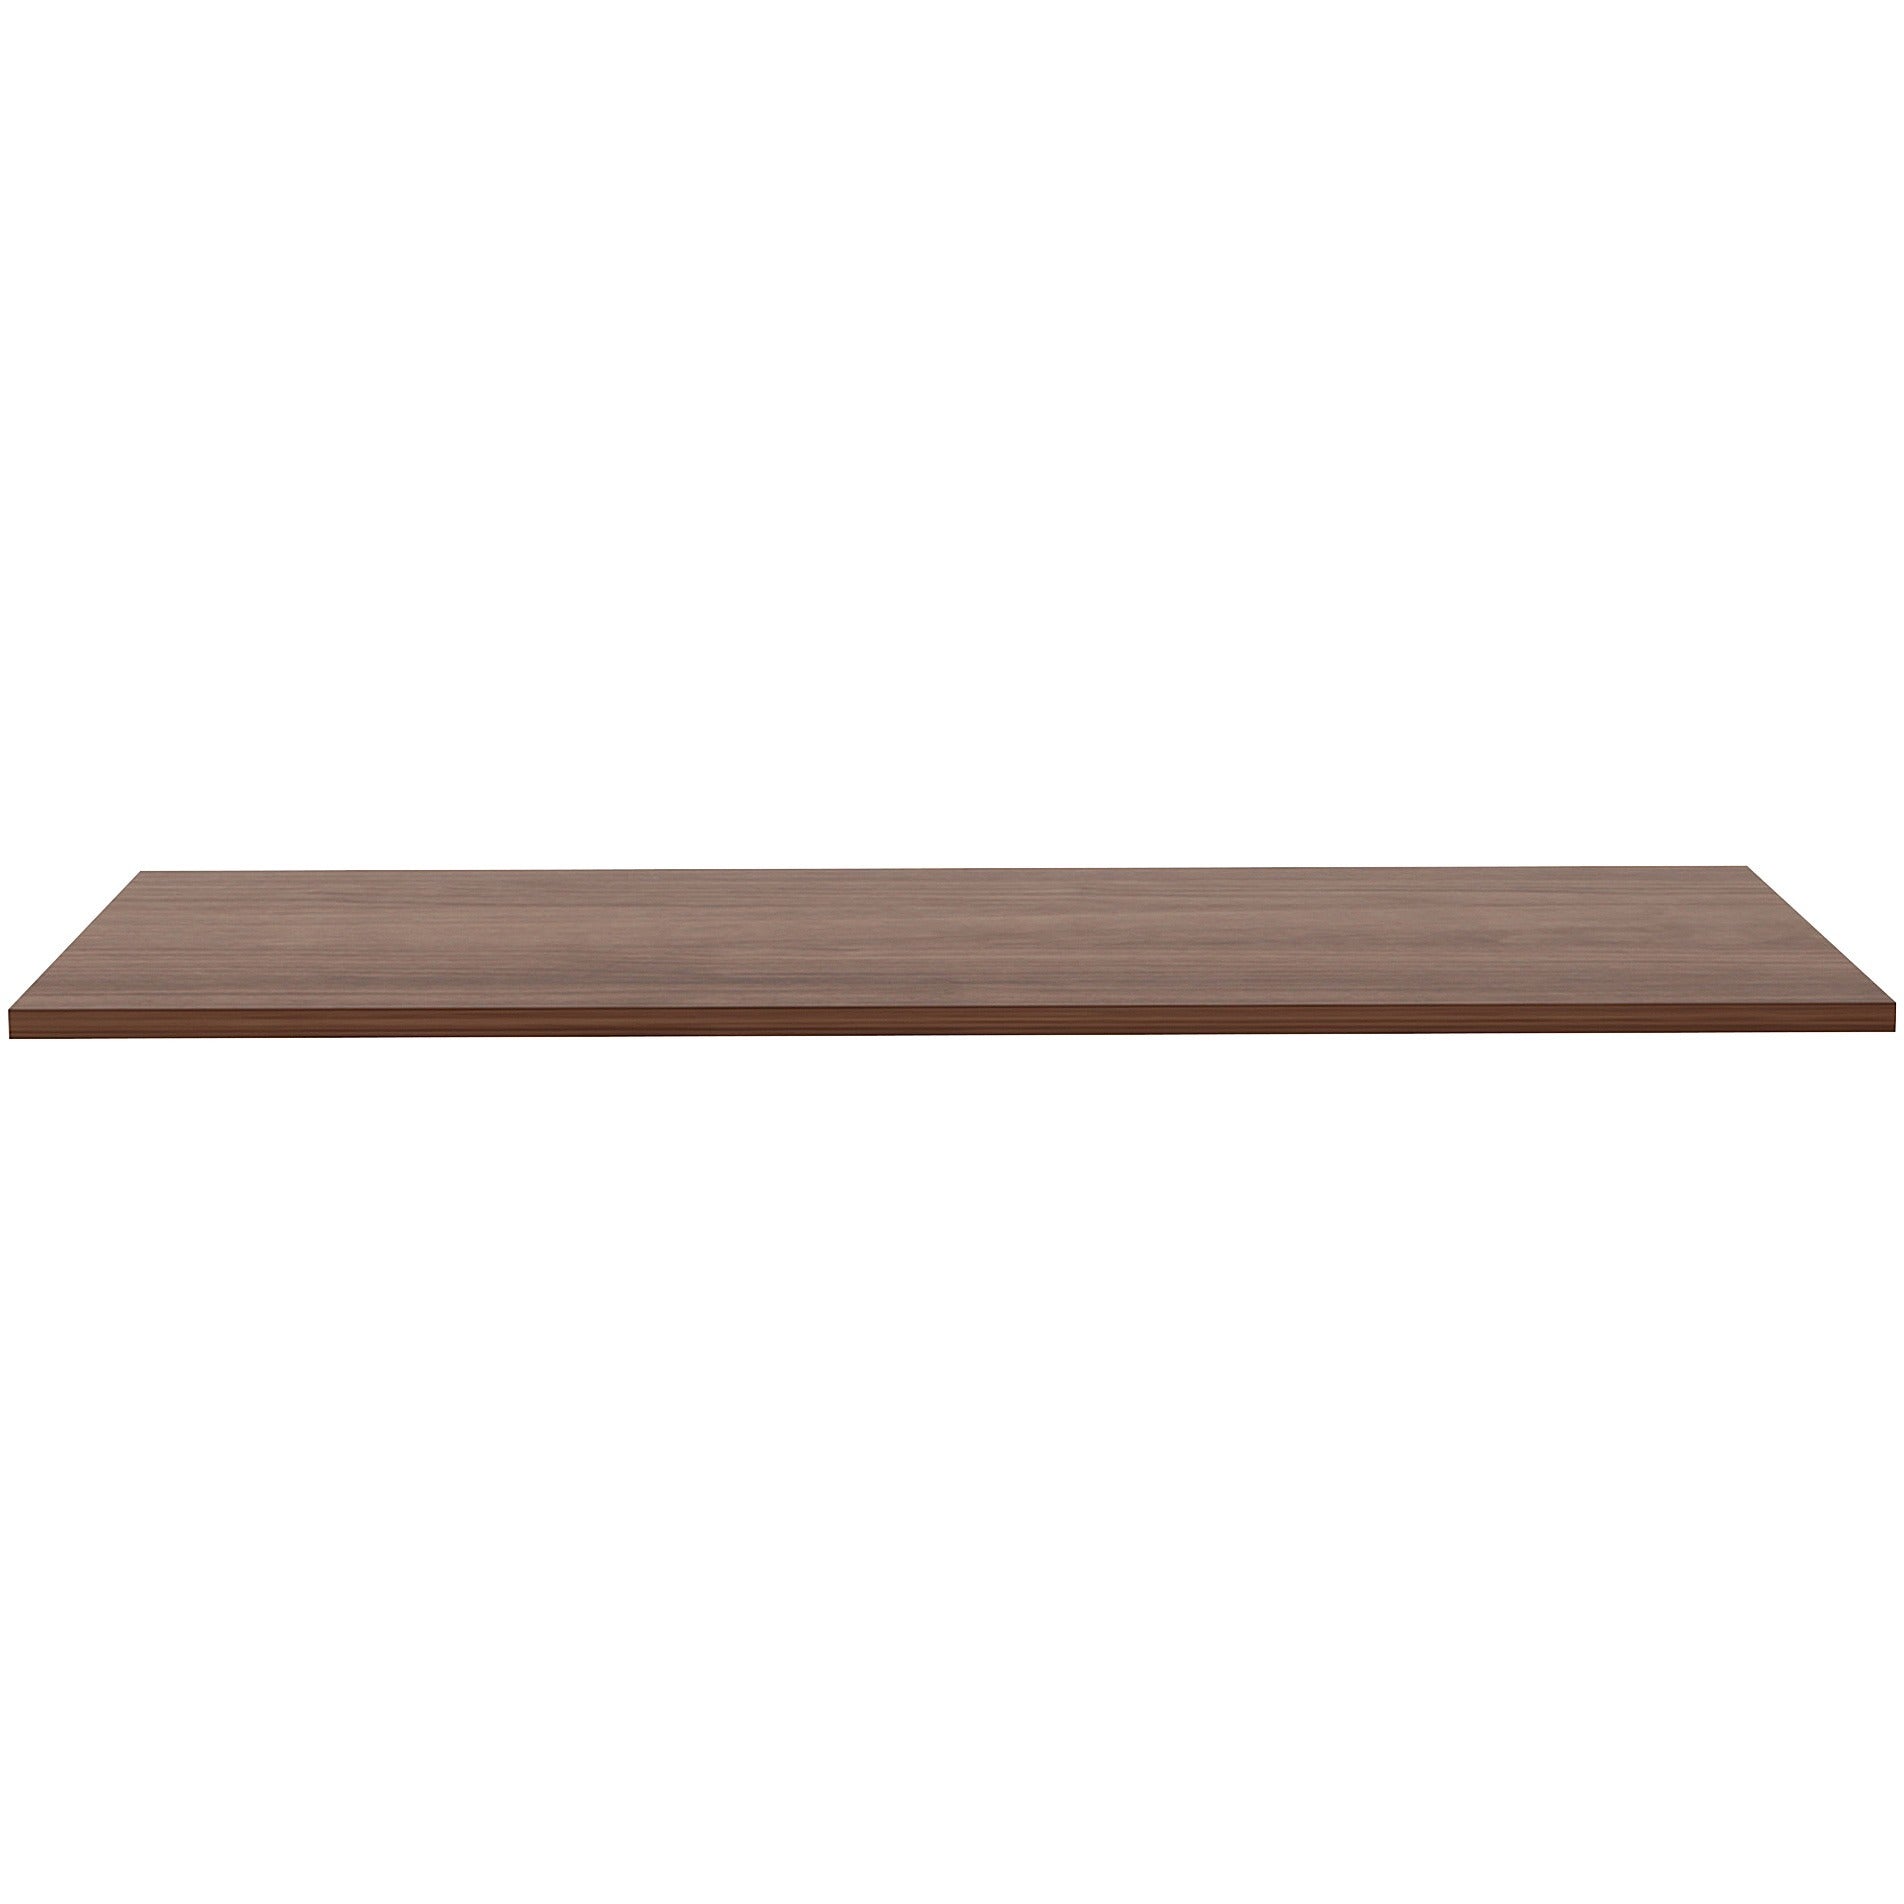 lorell-relevance-series-tabletop-for-table-topwalnut-rectangle-laminated-top-adjustable-height-x-24-table-top-width-x-60-table-top-depth-x-1-table-top-thickness-assembly-required-1-each_llr59635 - 2